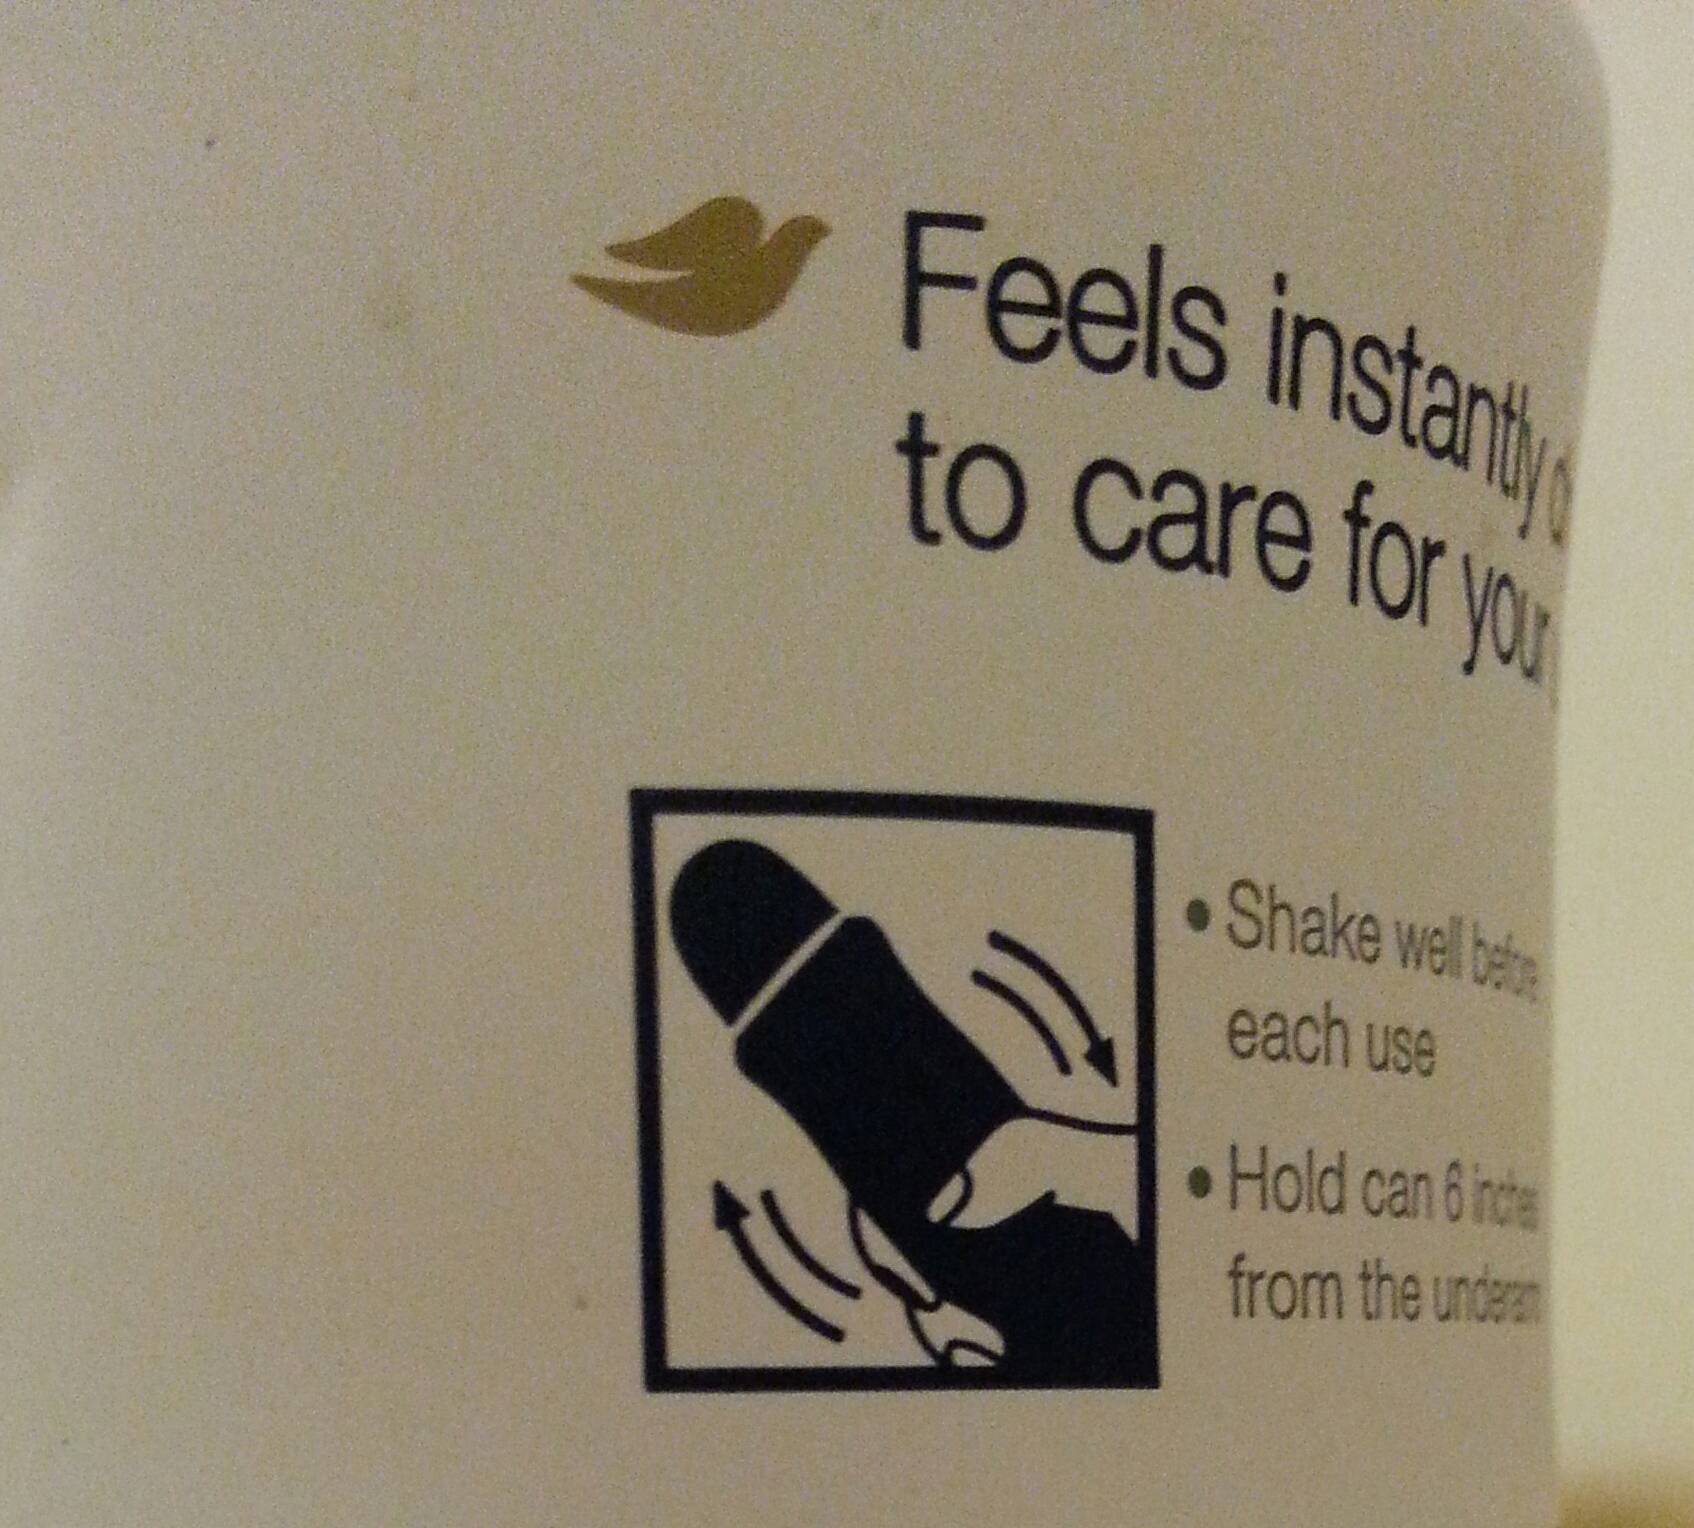 Feels instant to care for you Shake well be each use Hold can 6 ide from the under